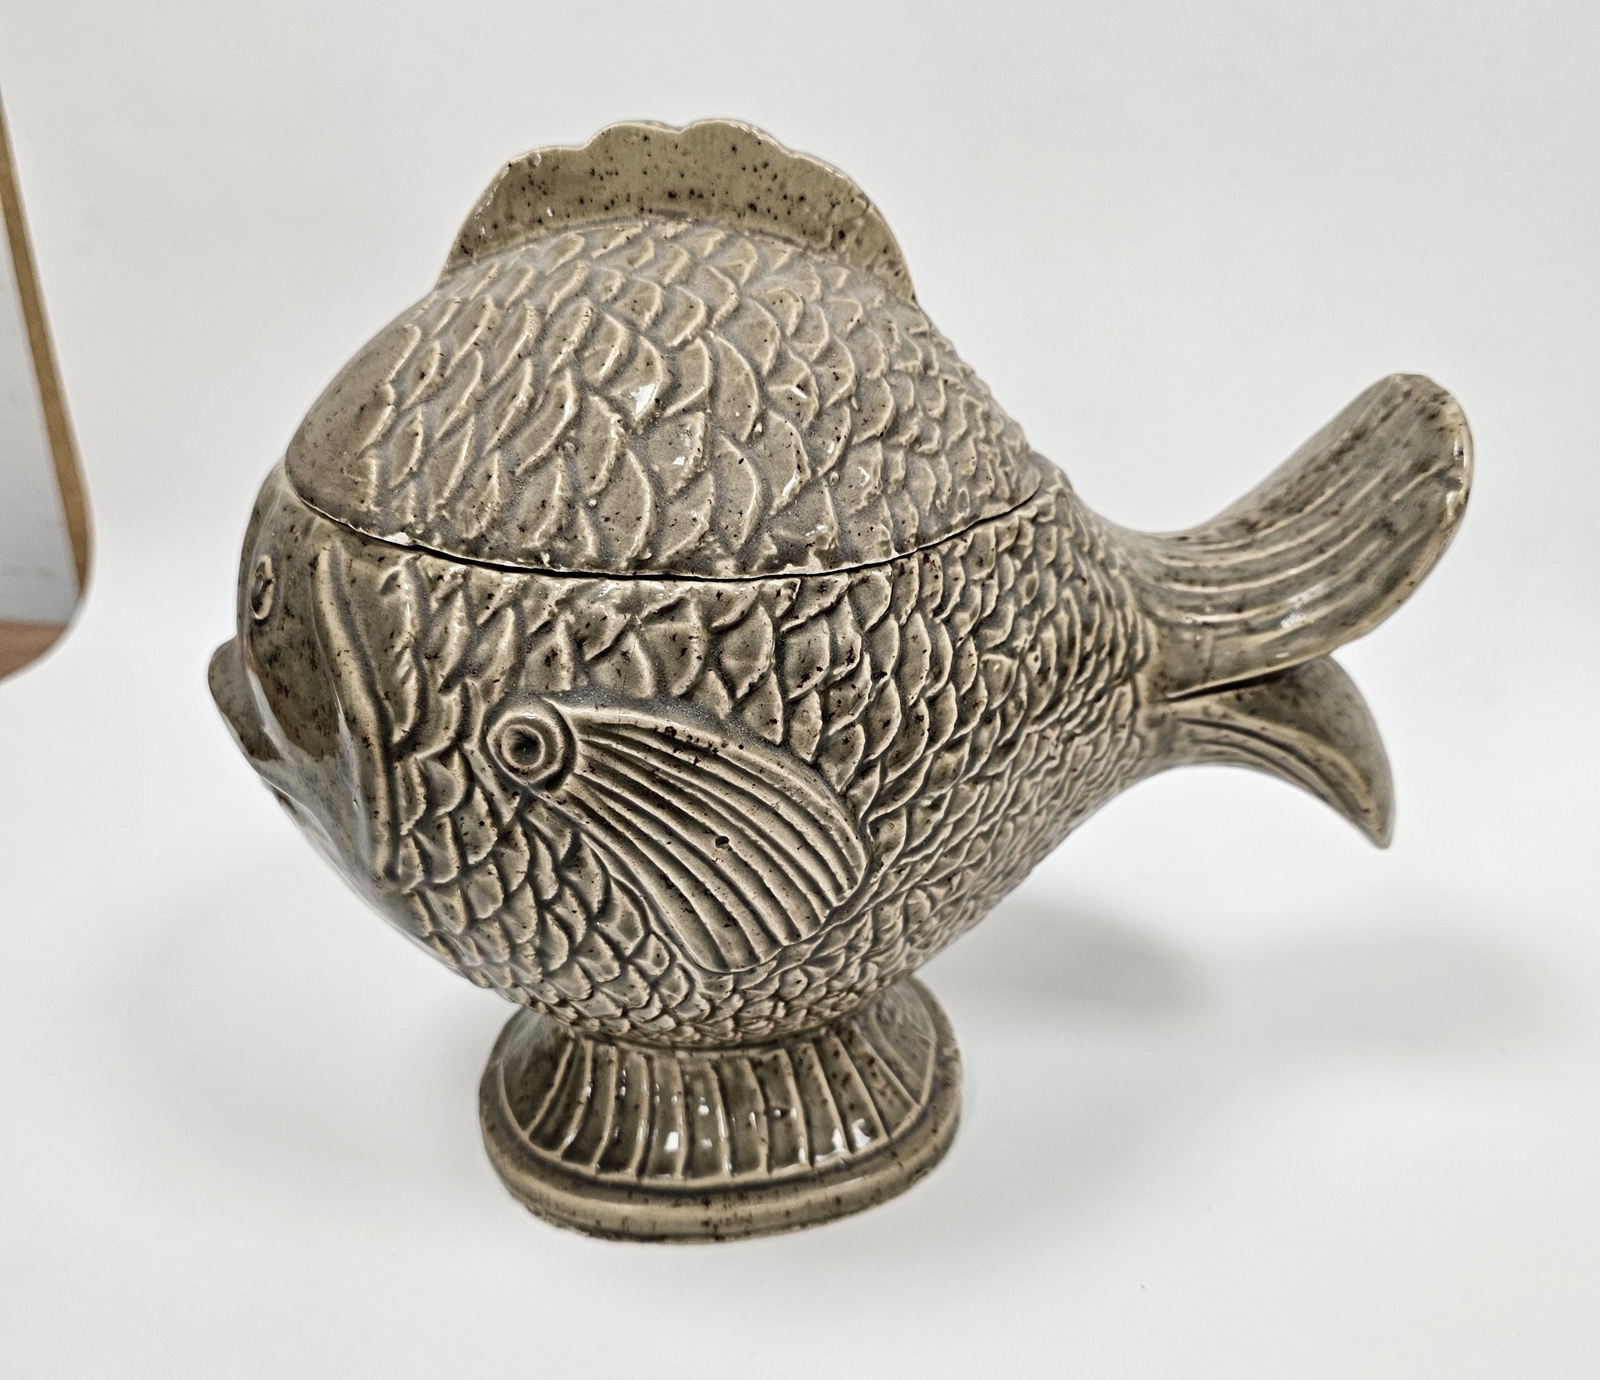 Poterie Maine Sars-Poteries fish tureen and cover, 20th century, scales and fins incised, enriched - Image 3 of 18